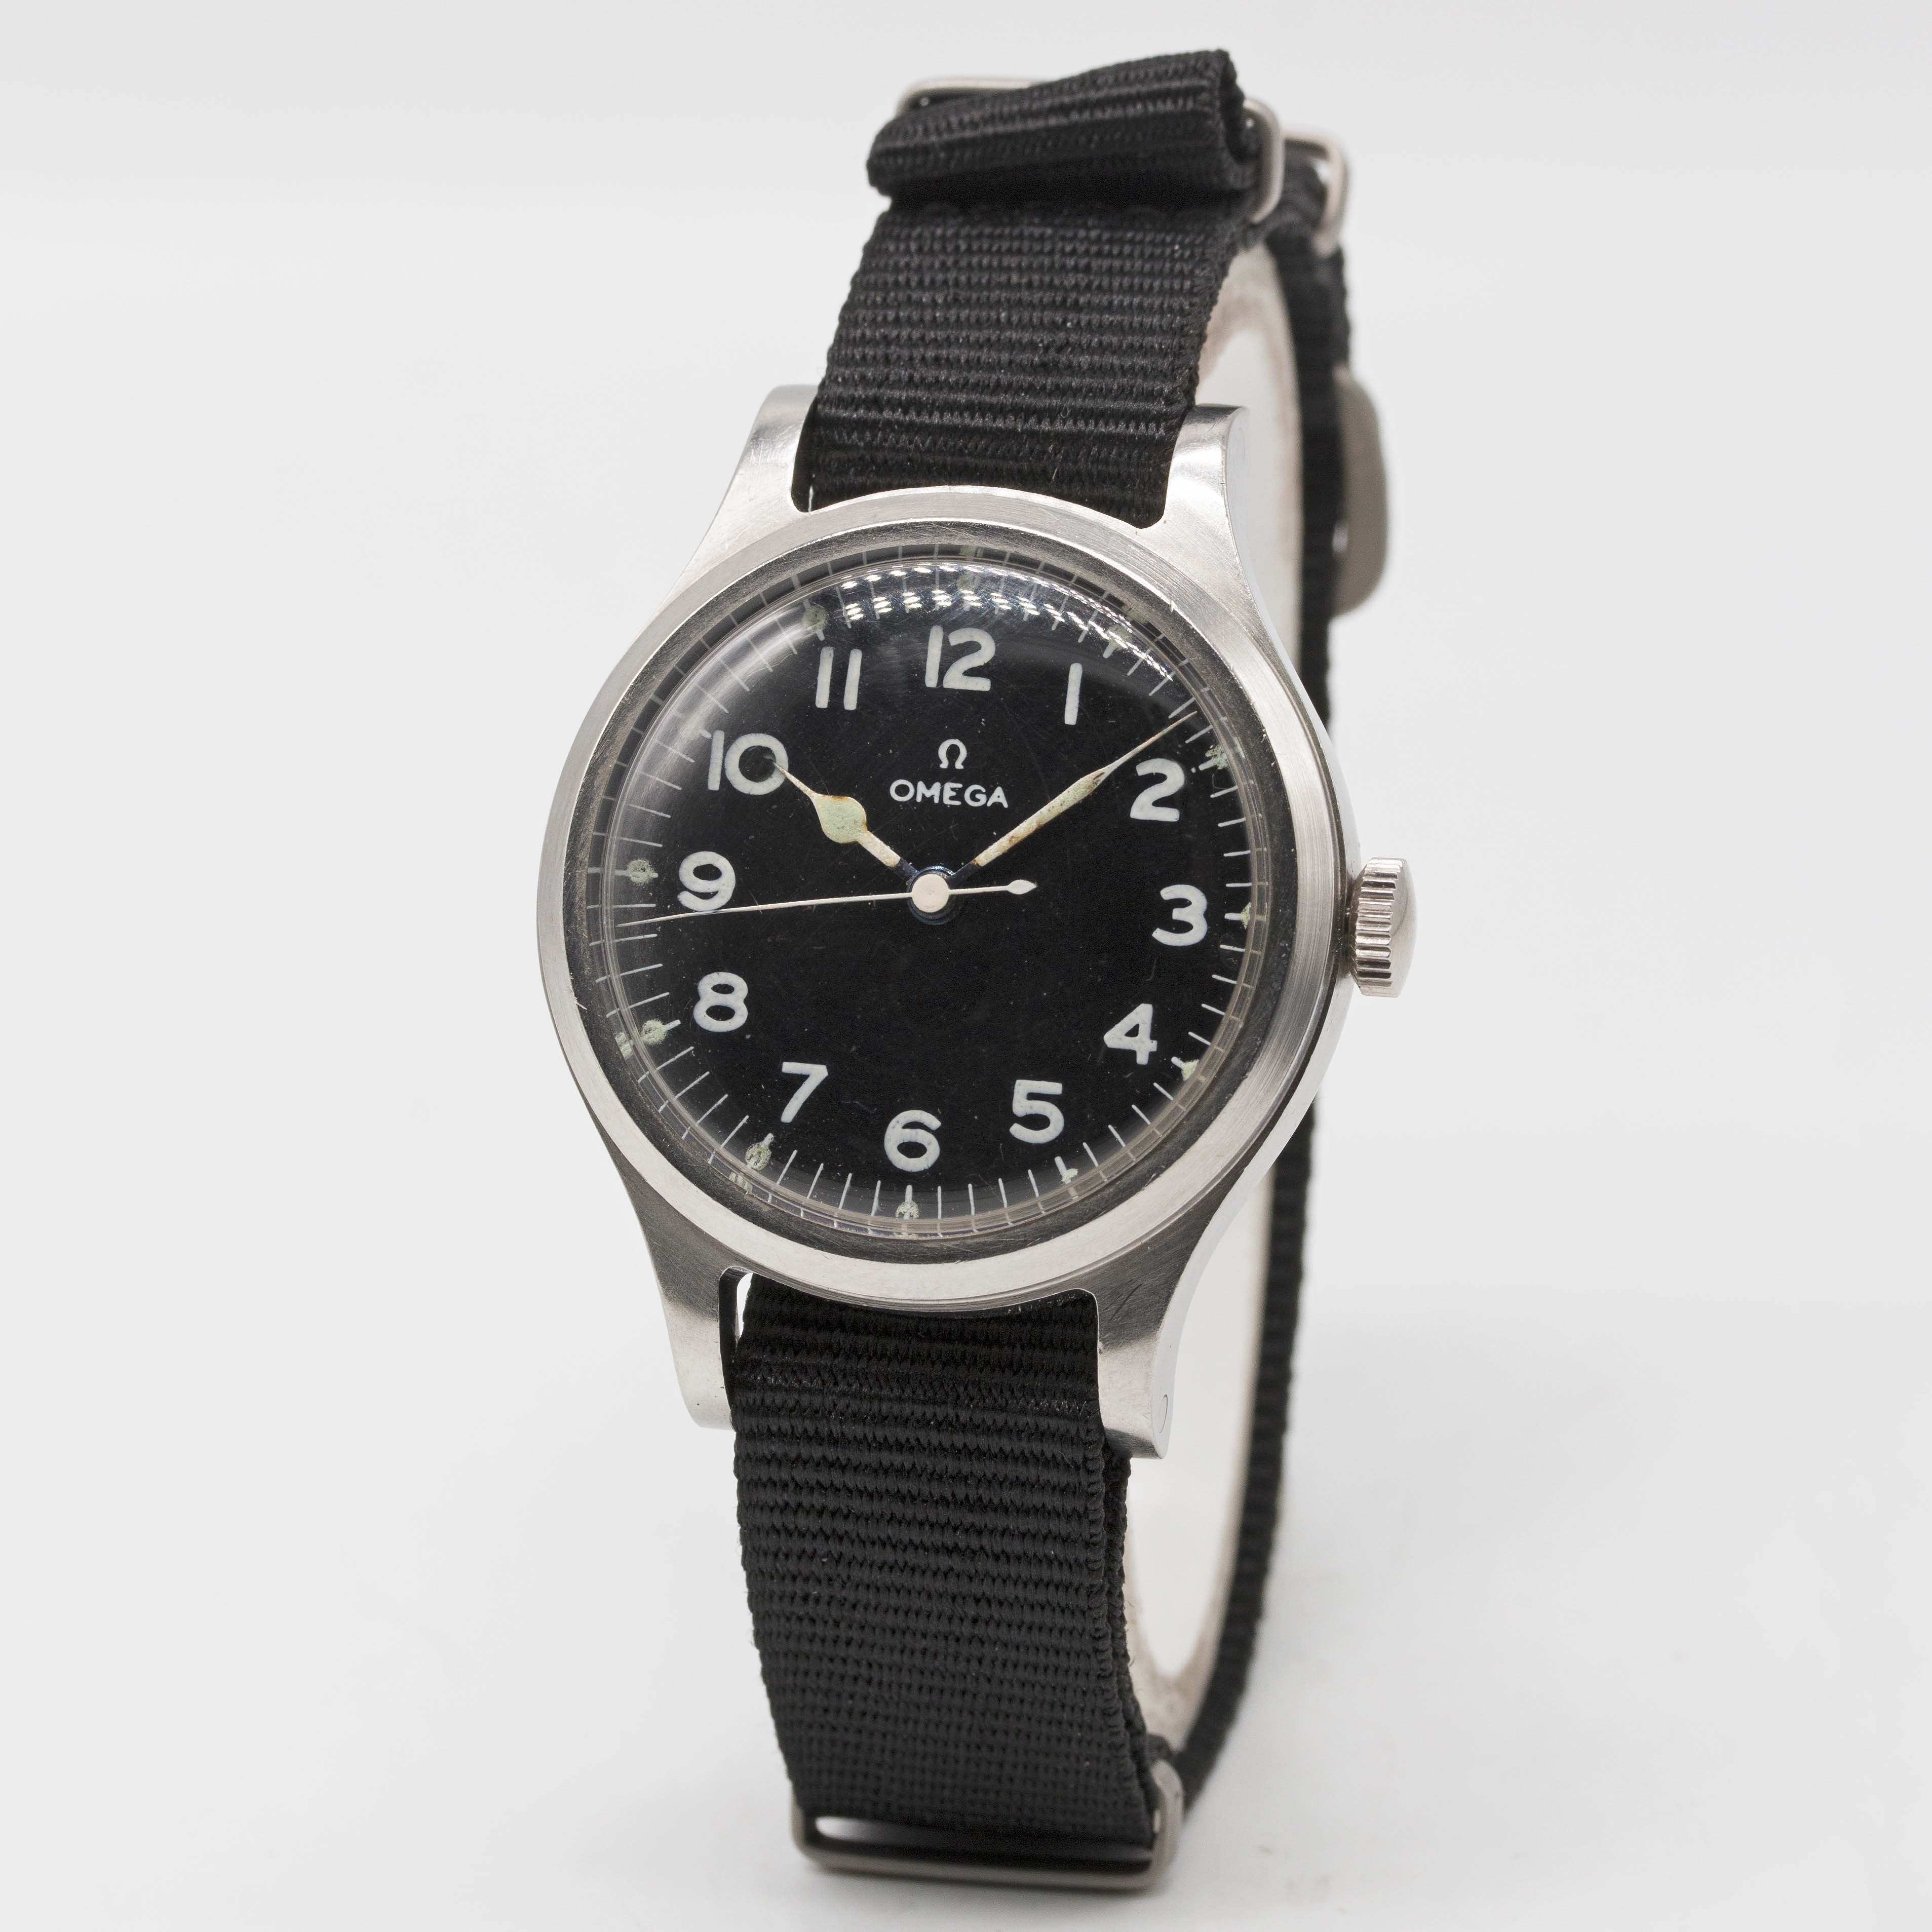 A GENTLEMAN'S STAINLESS STEEL BRITISH MILITARY OMEGA RAF PILOTS WRIST WATCH DATED 1956, WITH BLACK - Image 2 of 4